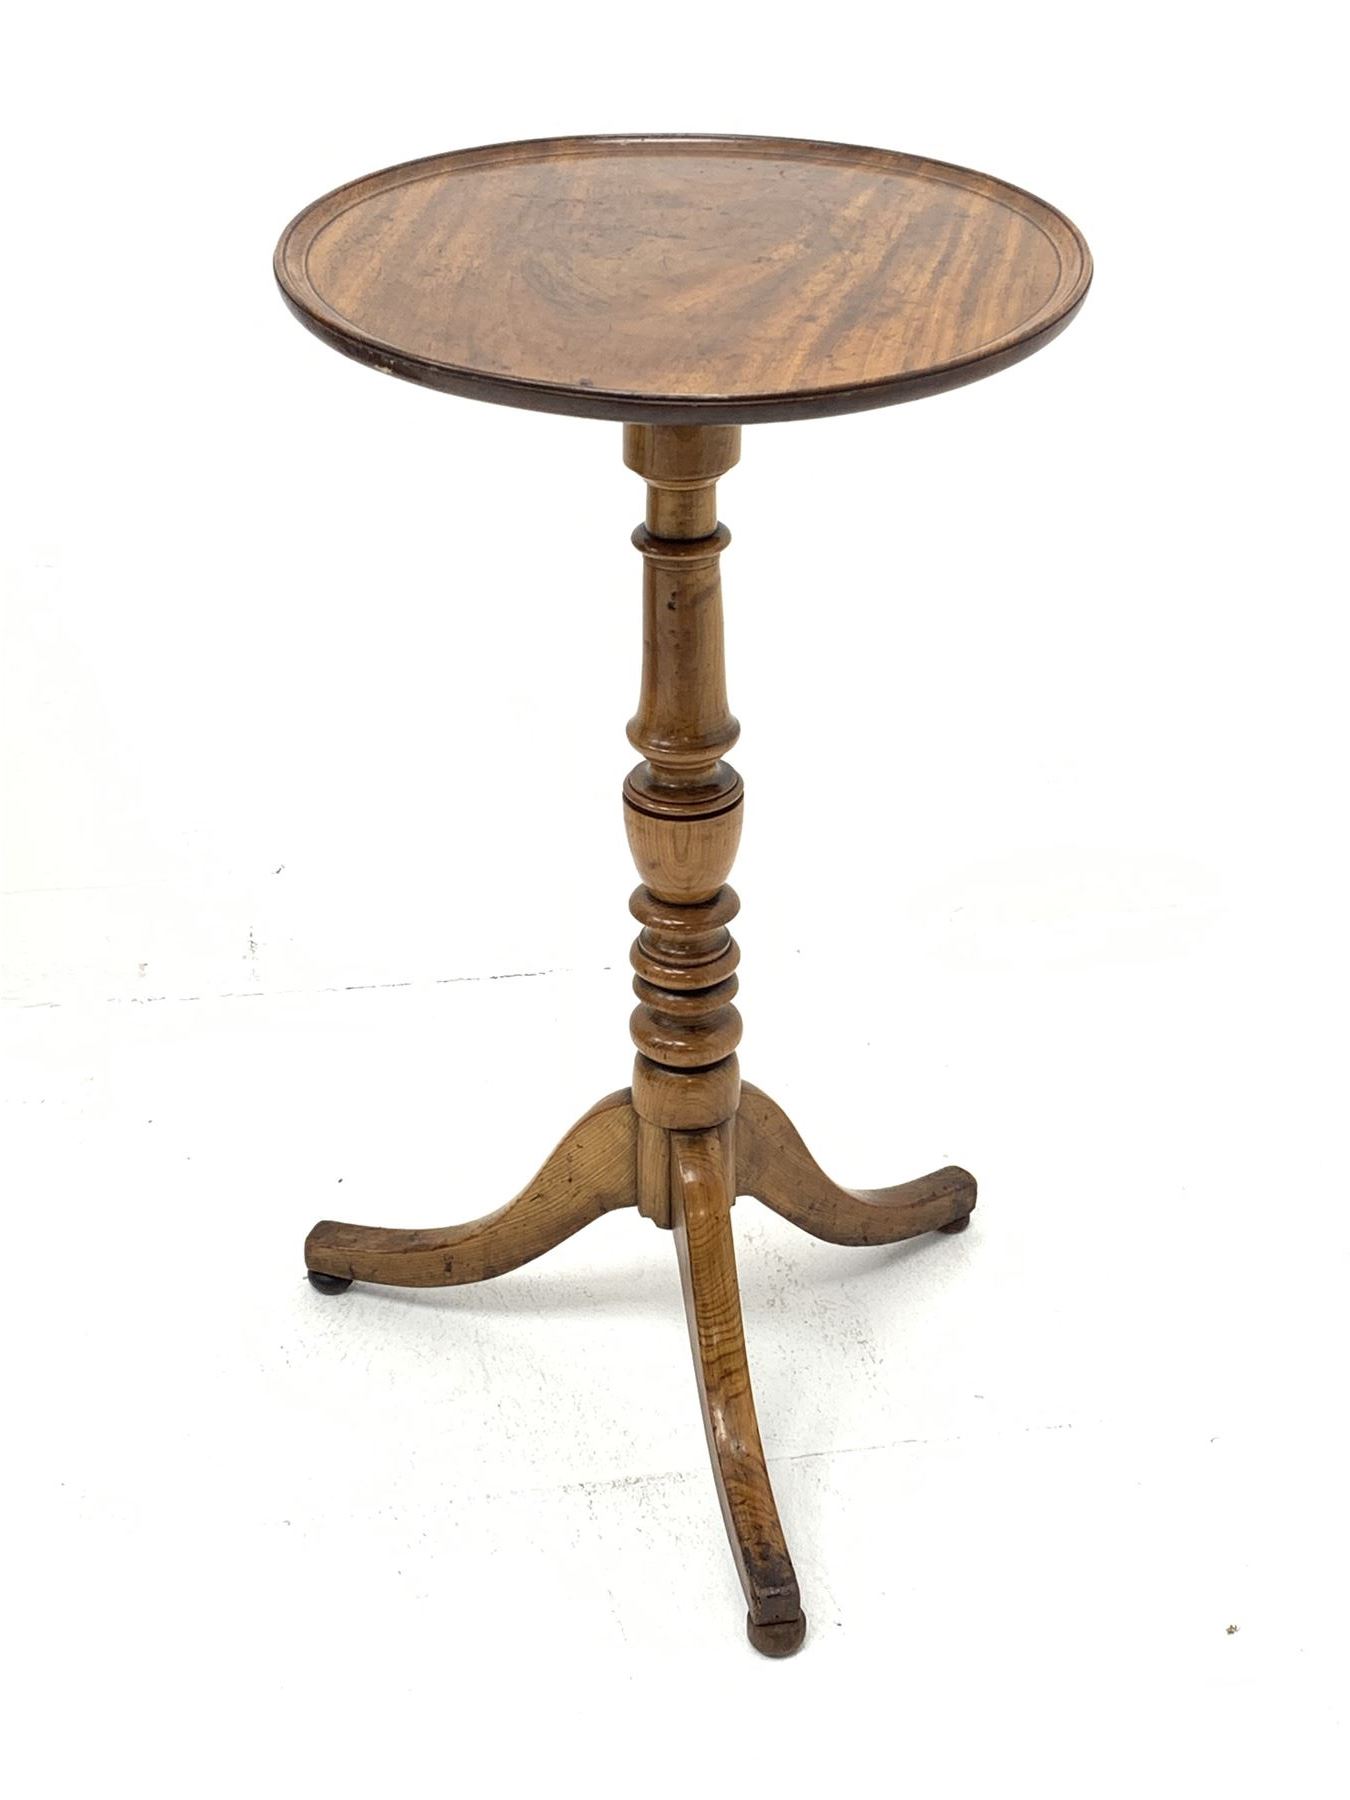 Early 19th century tripod table - Image 4 of 4